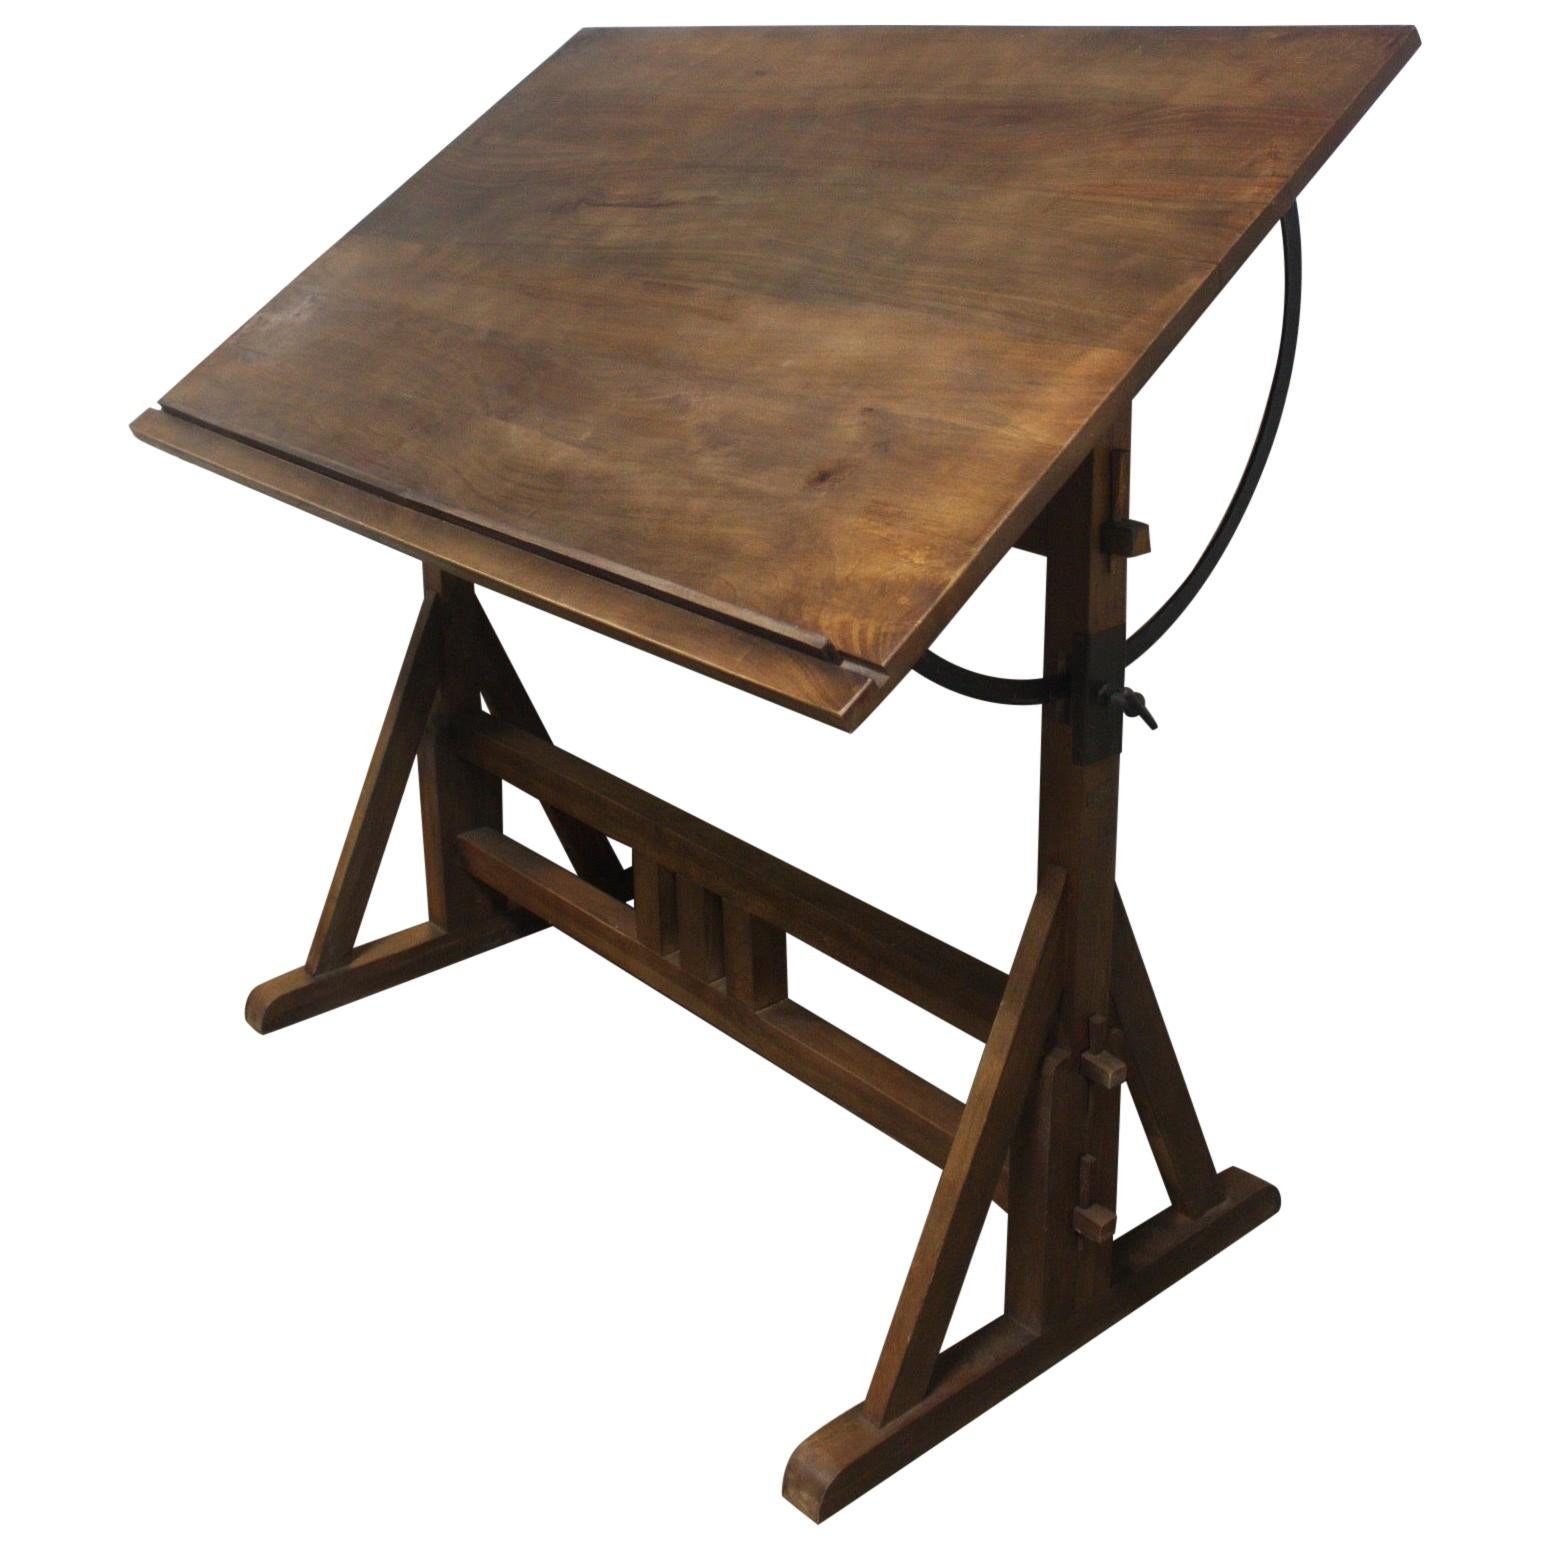 Superb Early 20th Century French Architected Table